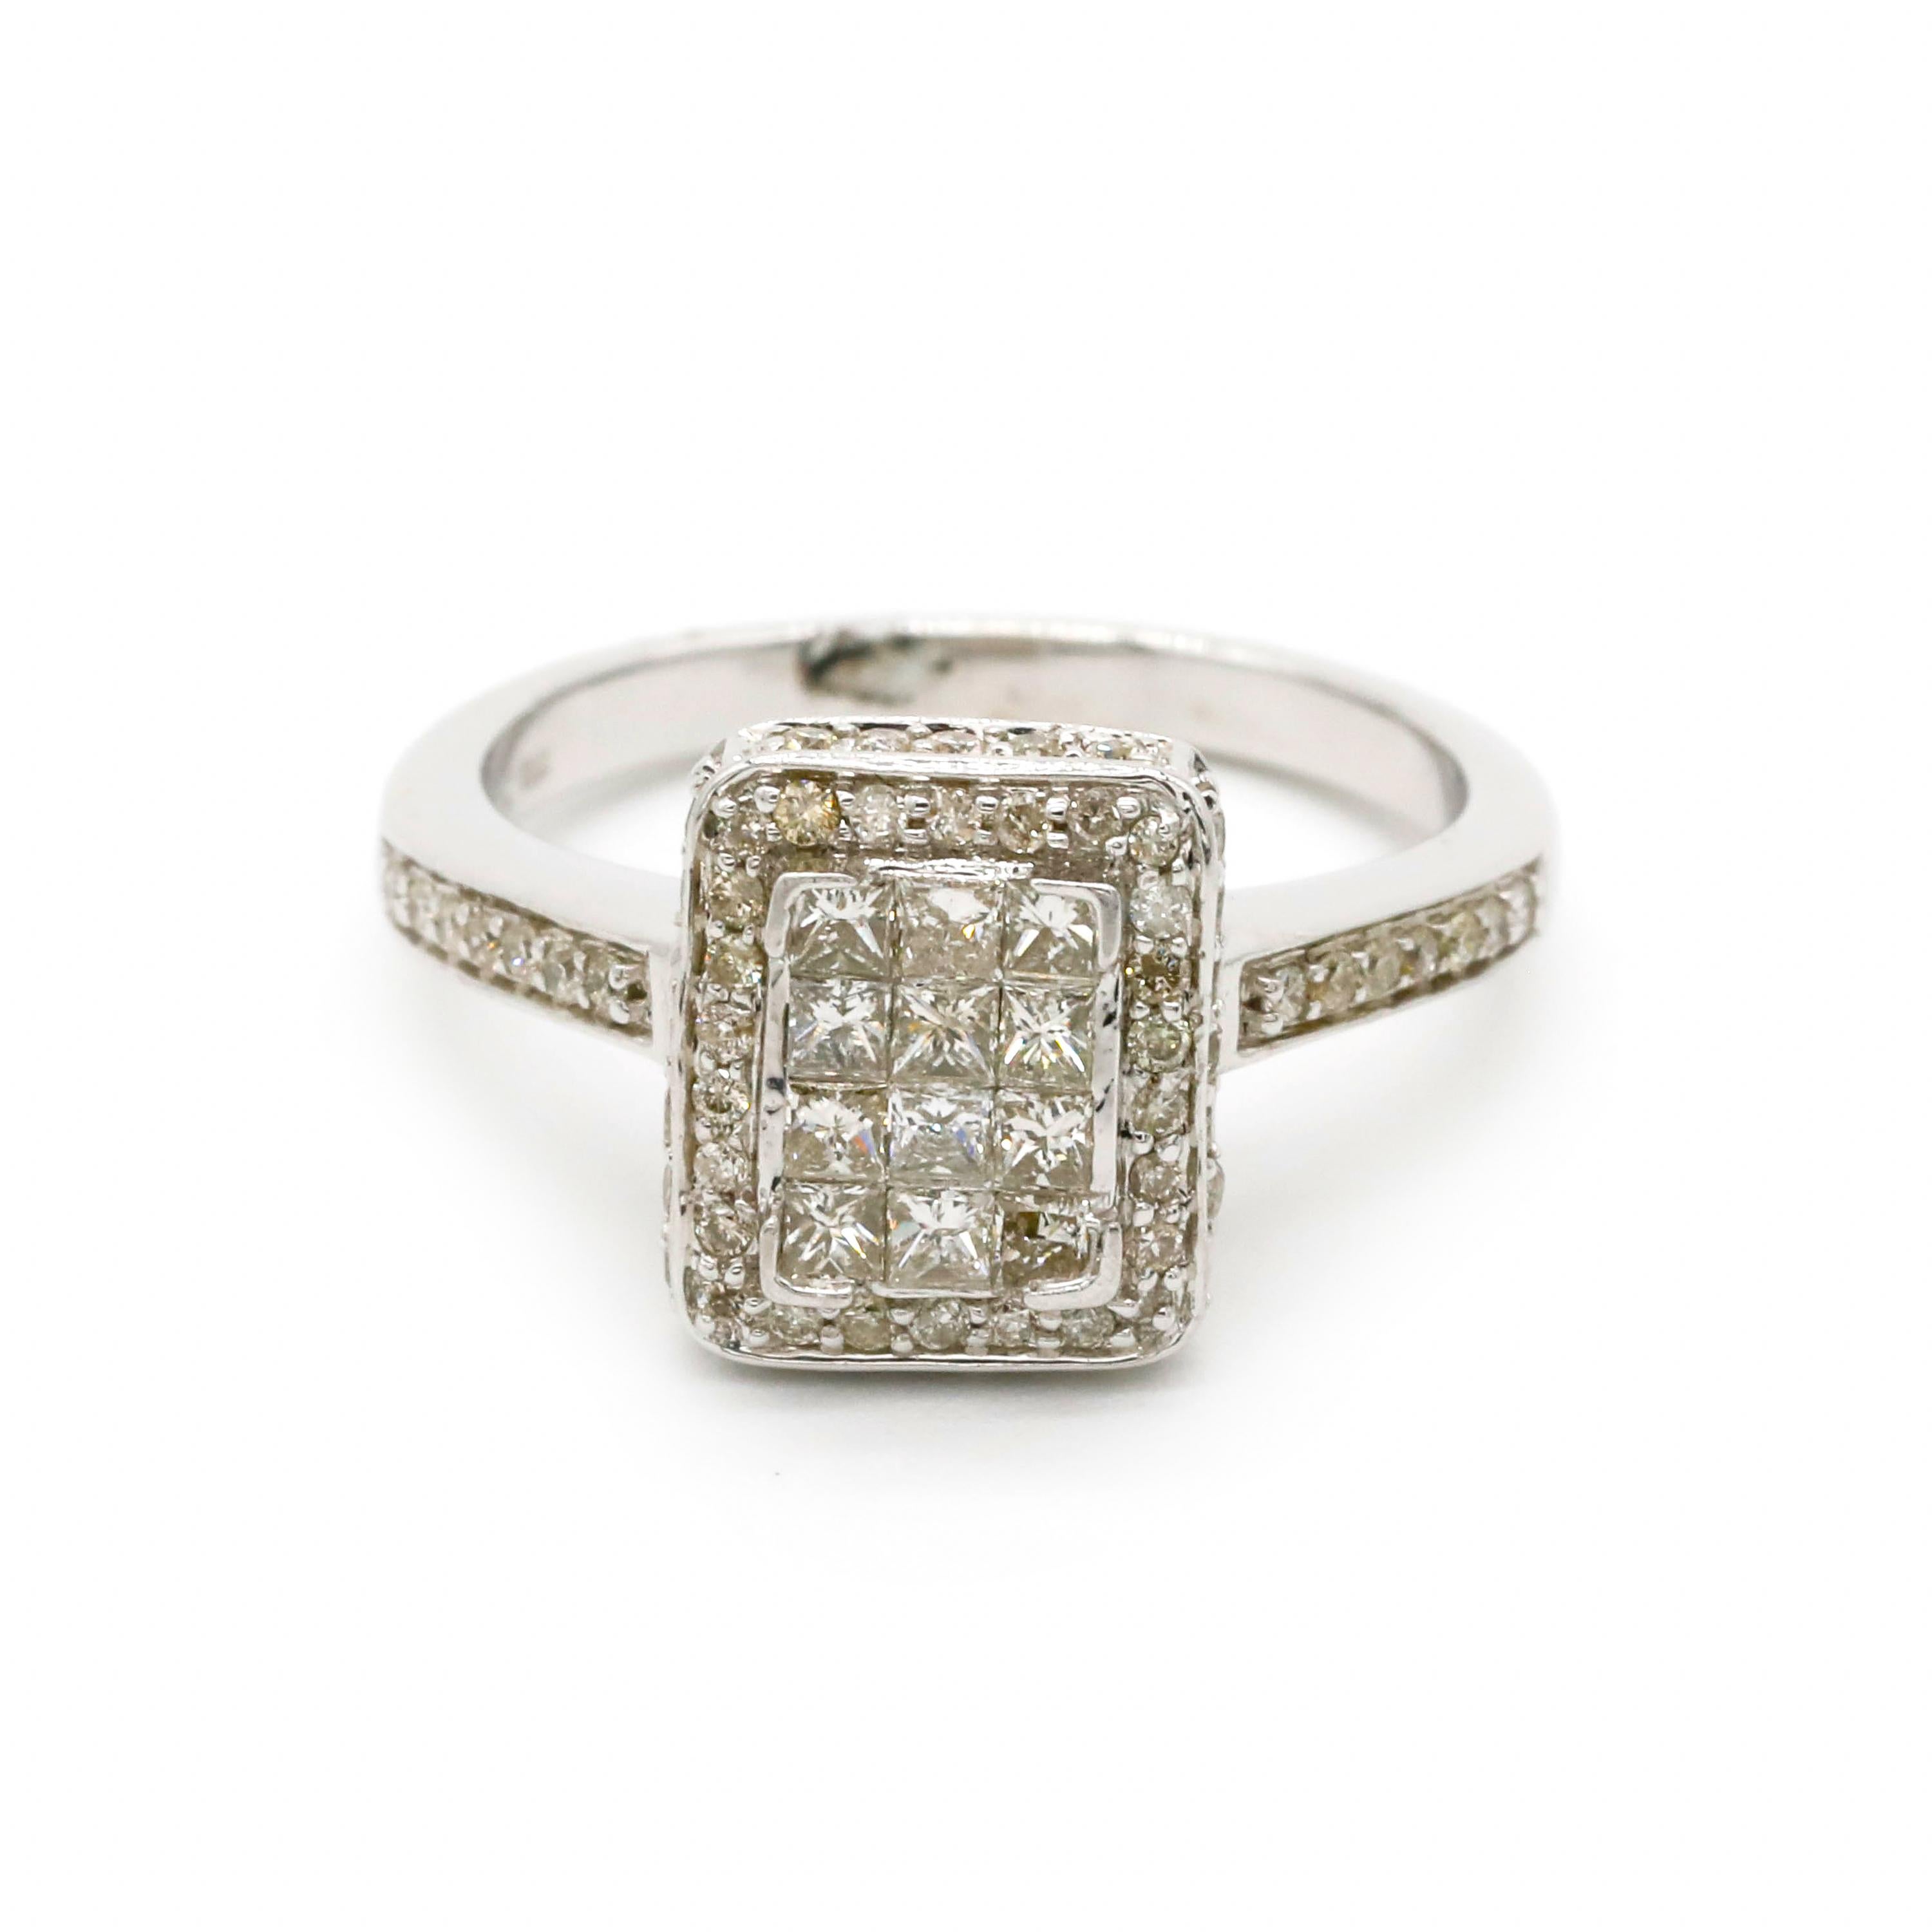 Gregg Ruth 18k White Gold 1.0 Carat Princess Cut Diamond Engagement Ring Sz 6.5 In New Condition For Sale In New York, NY